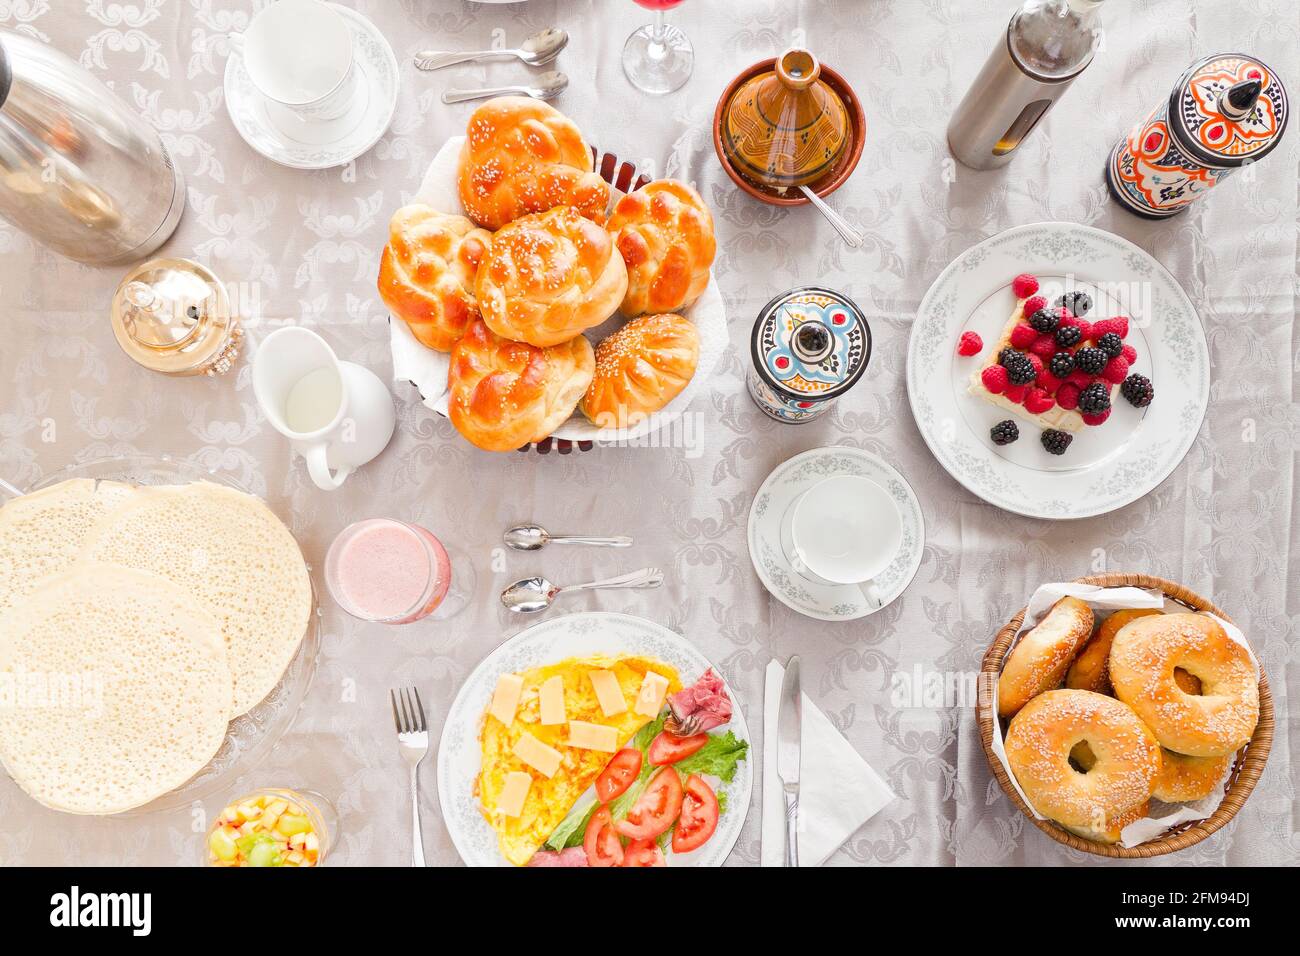 Top view of assorted healthy breakfast on a table Stock Photo